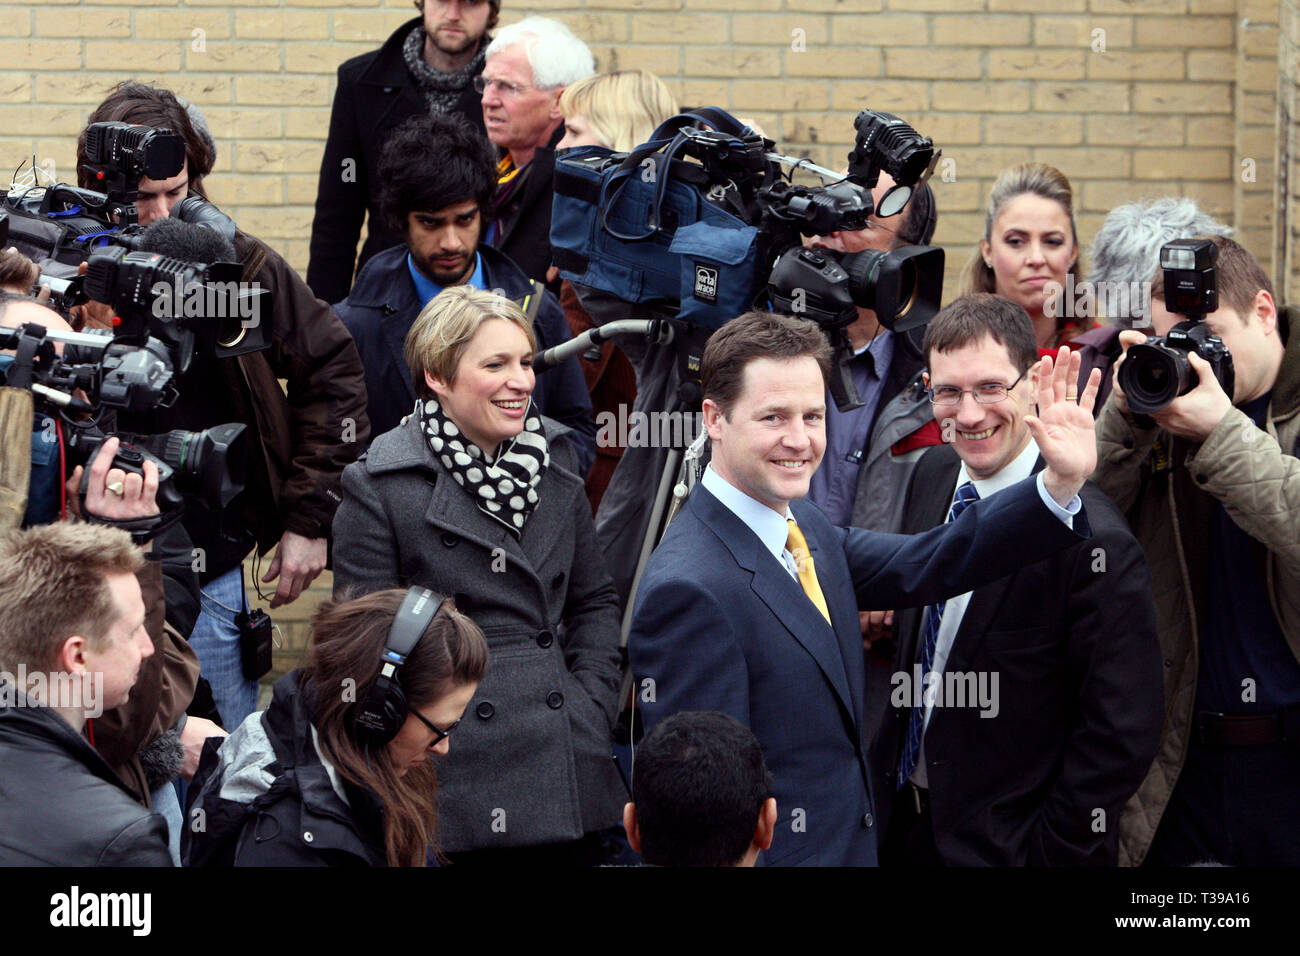 Liberal Democrat leader Nick Clegg arrives. 2010 General Election. Finchley, North London. 5.4.10 Stock Photo